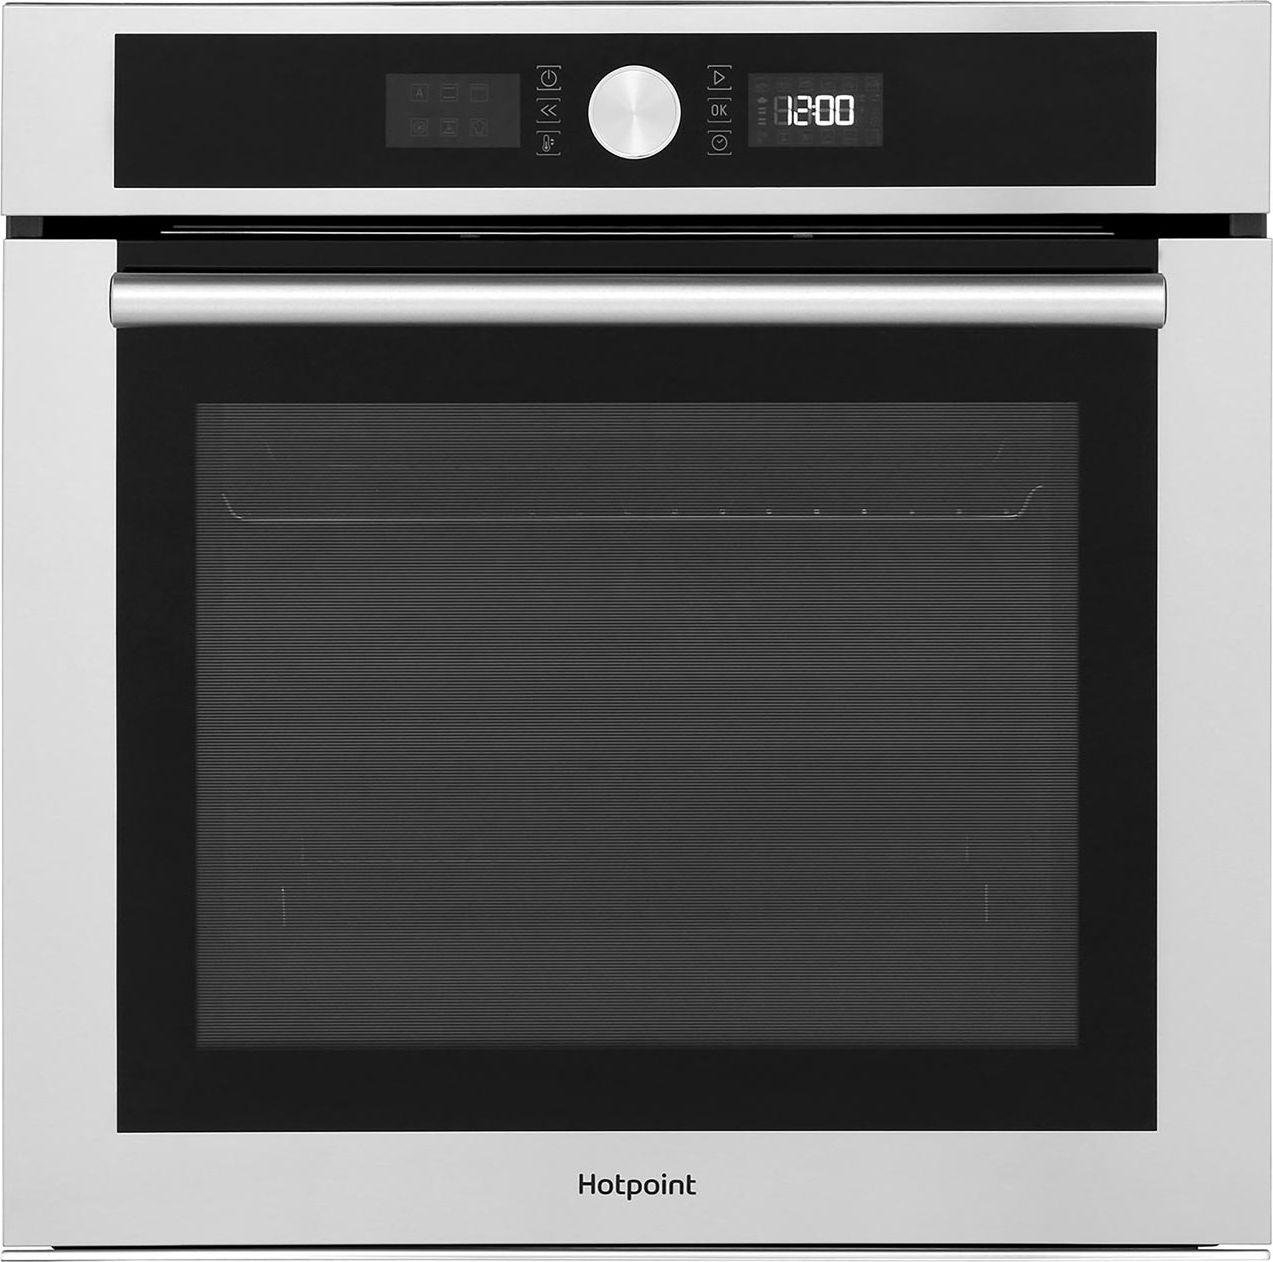 Hotpoint Class 4 SI4854PIX Built In Electric Single Oven and Pyrolytic Cleaning - Stainless Steel - A+ Rated, Stainless Steel